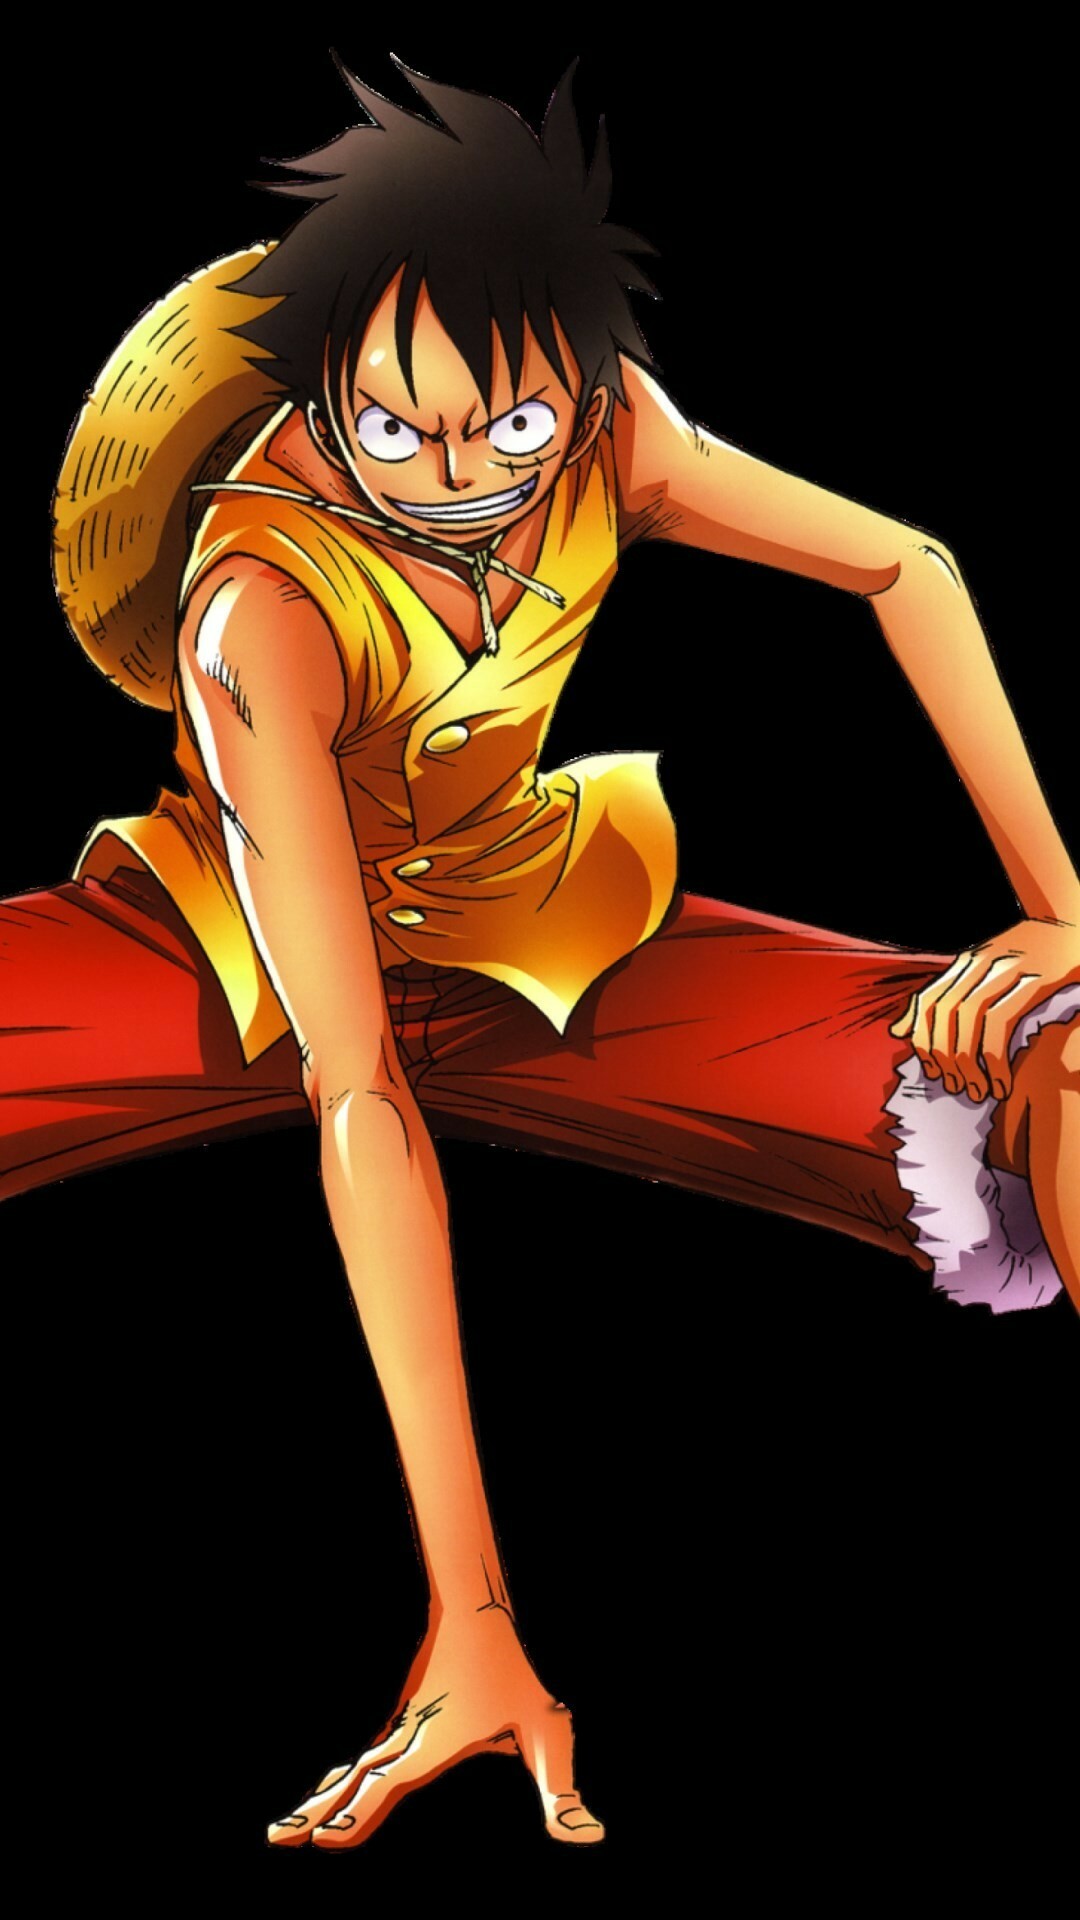 One Piece: Monkey D. Luffy, was ranked as top three world's most popular character according to TV Time. 1080x1920 Full HD Background.